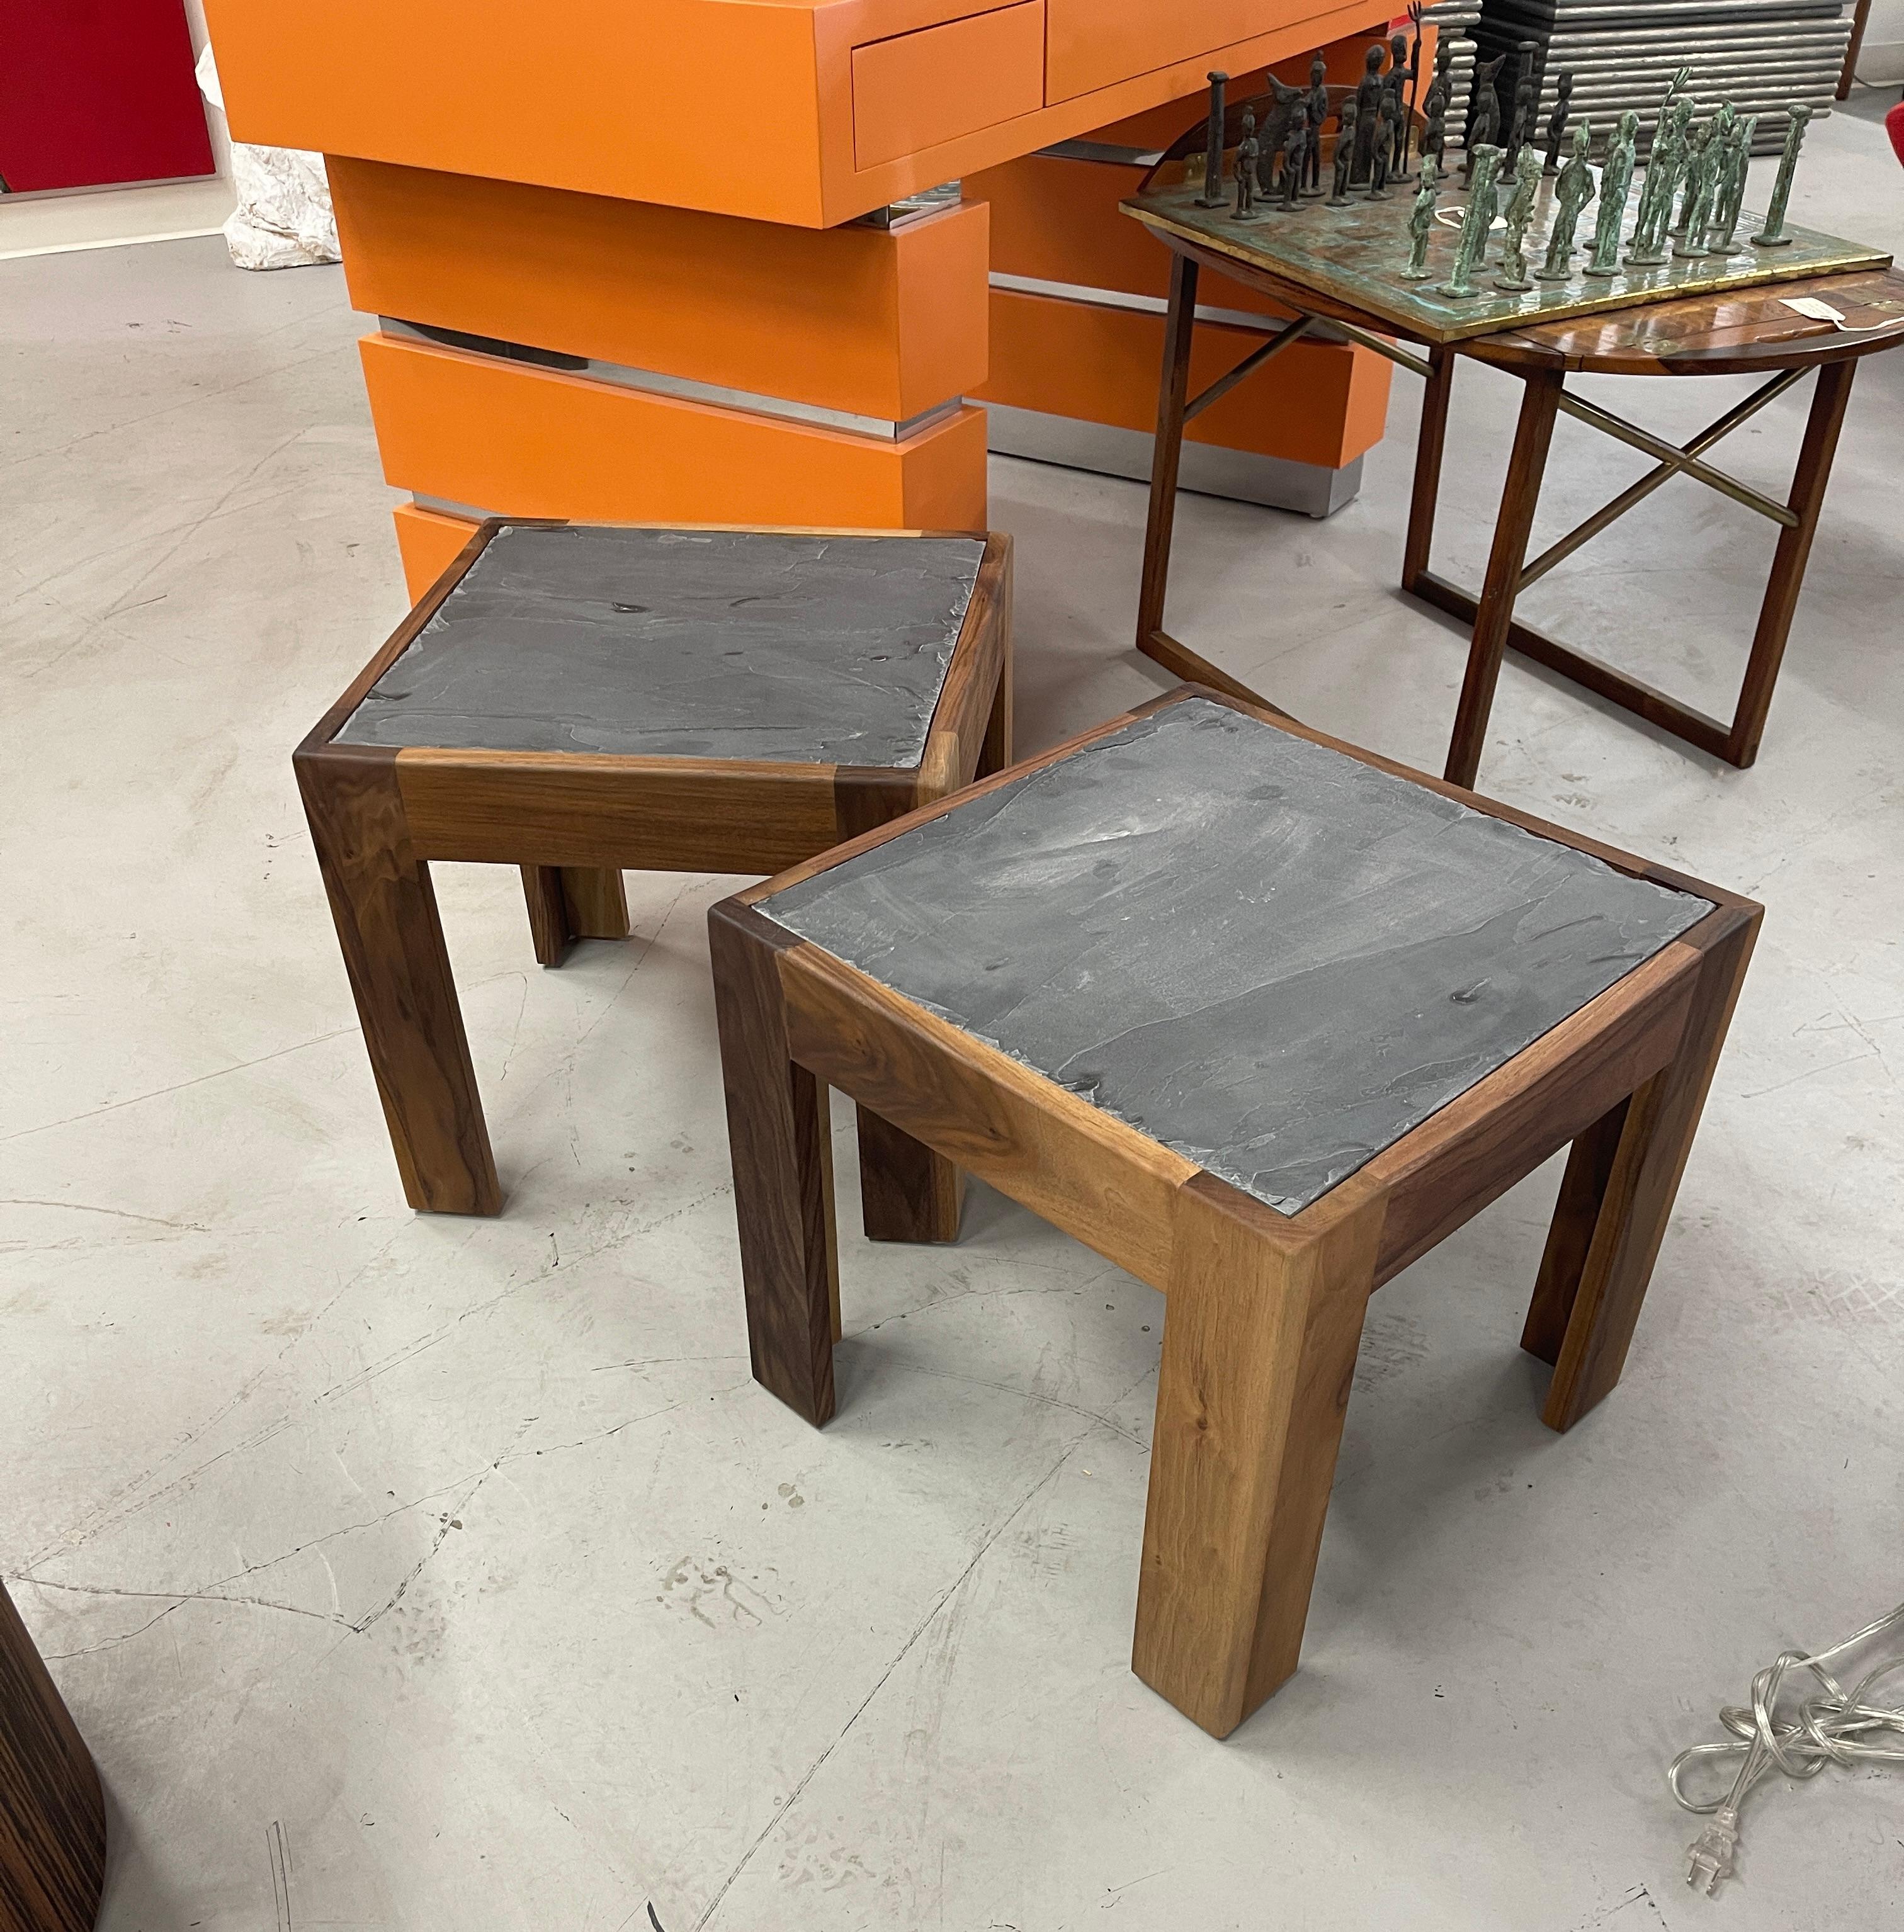 A pair of solid walnut tables with slate inset tops. Beautiful graining to the walnut sides. These are custom pieces newly made and ready to ship. The slate pieces have natural flaws, and imperfections, please see the detailed photos.